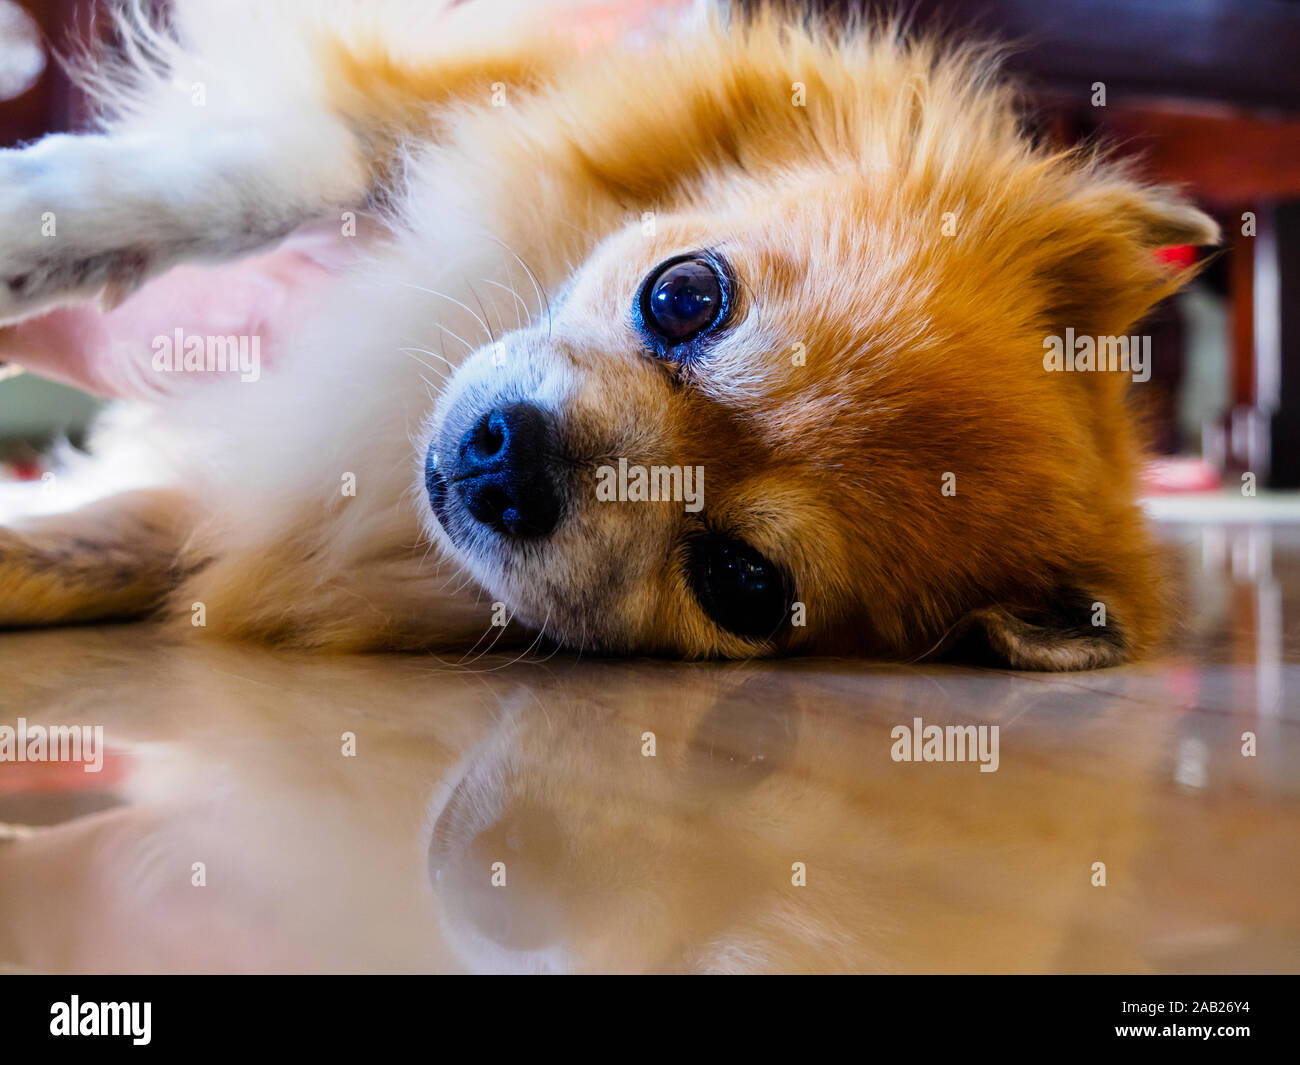 Cute reddish-brown mixed breed pet dog of Pomeranian and Chihuahua stock smiling and looking in the camera with a curious expression Stock Photo